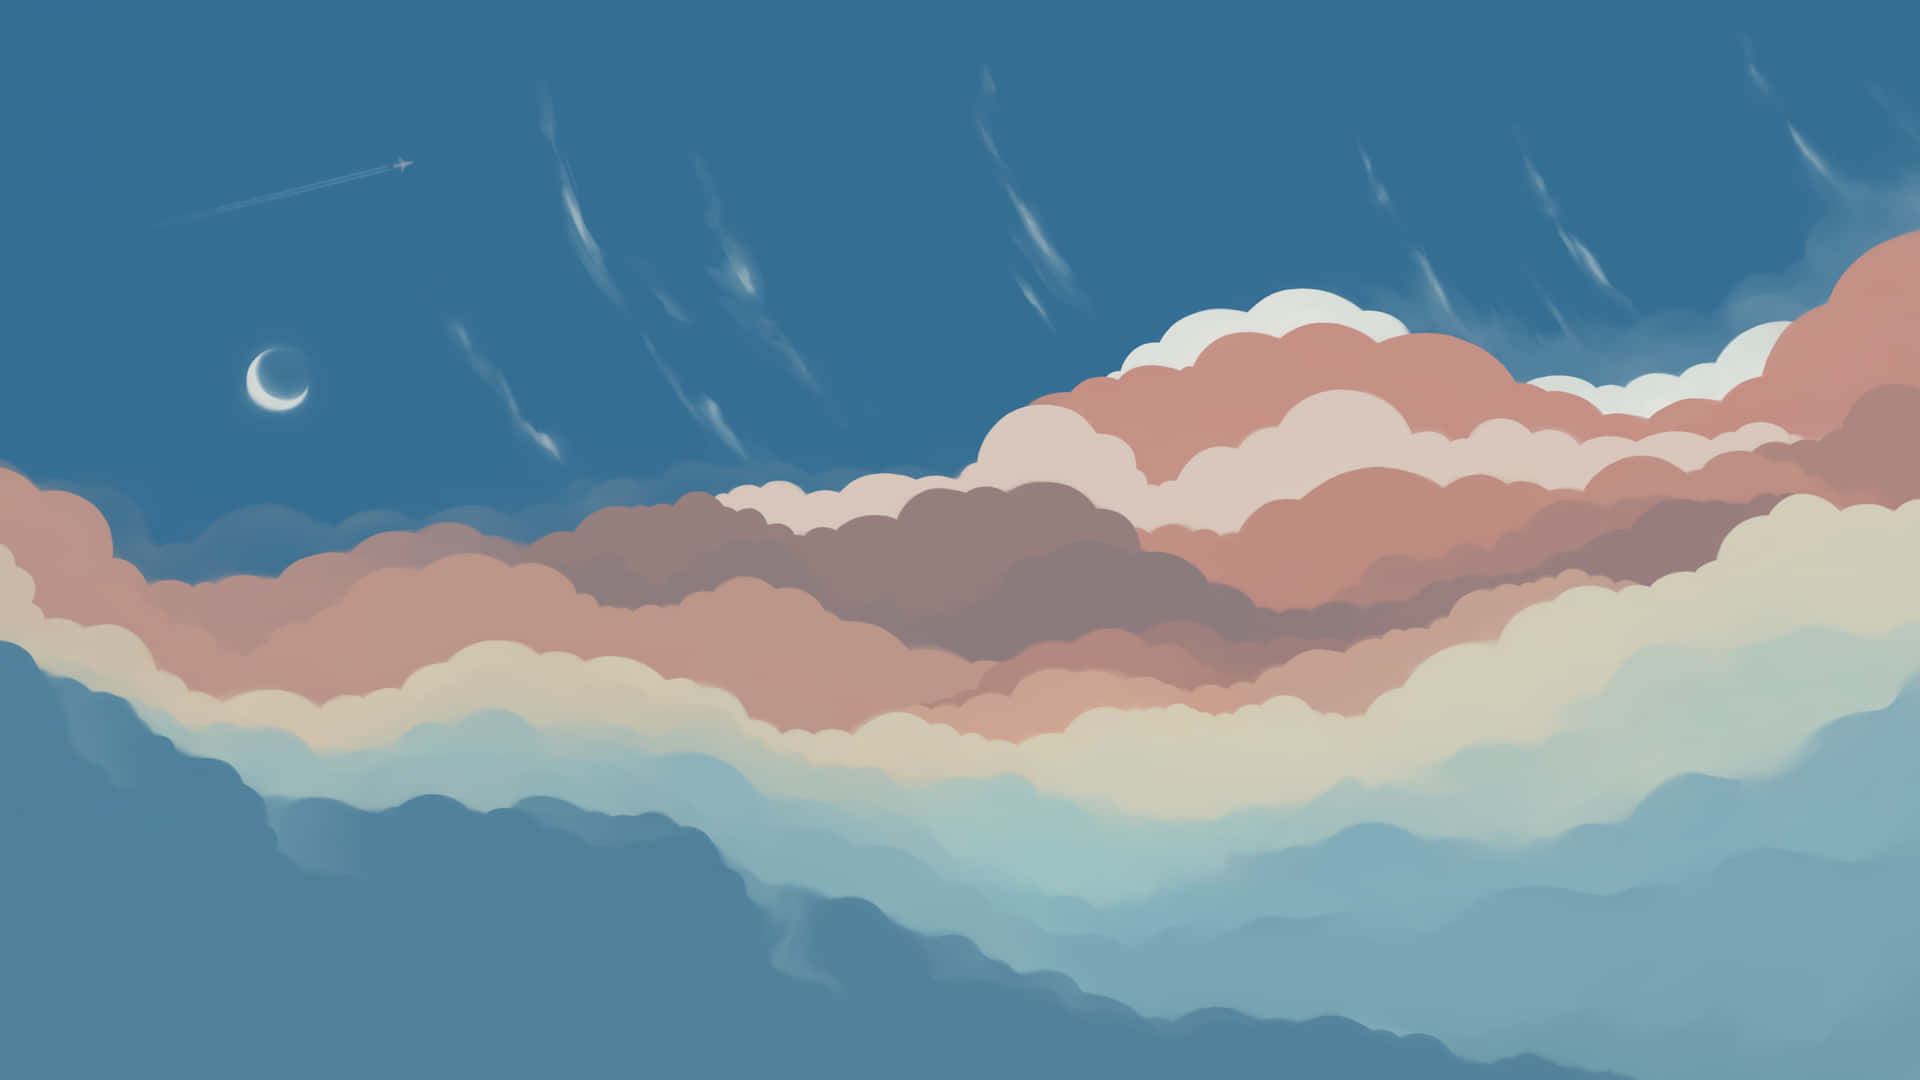 A Painting Of Clouds And A Moon Wallpaper